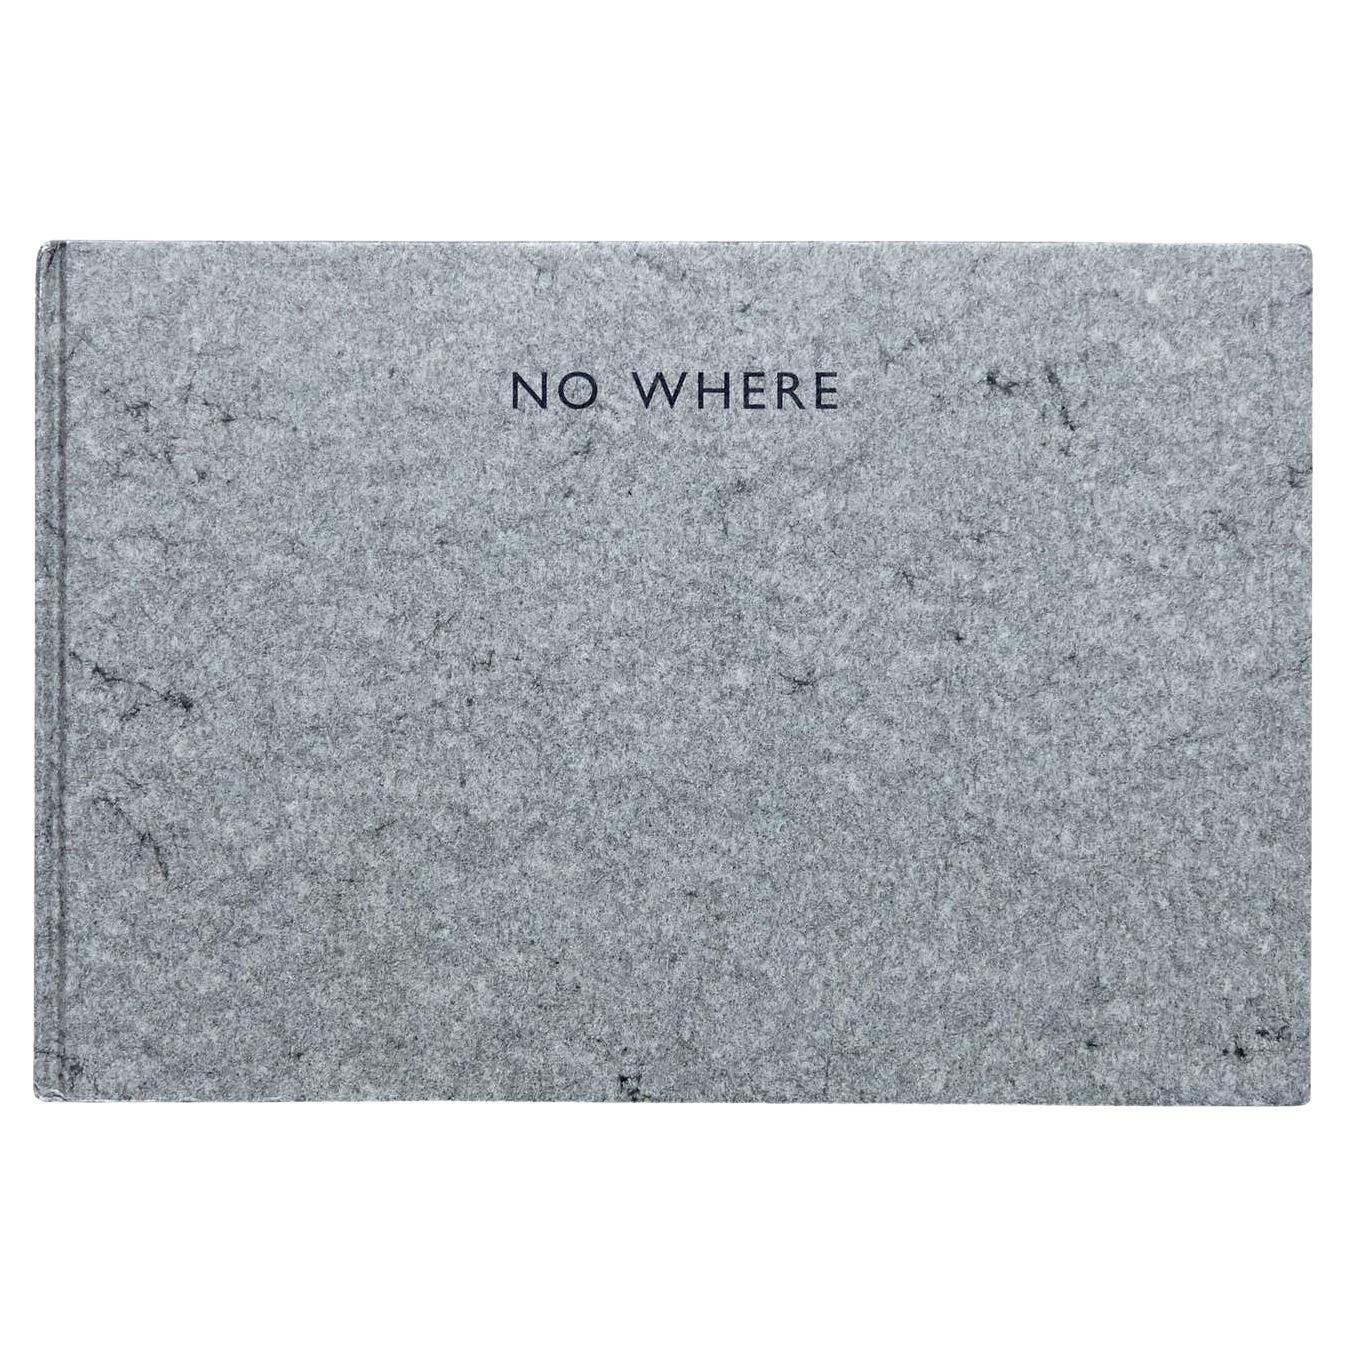 No Where, Richard Long Book Hand Signed For Sale